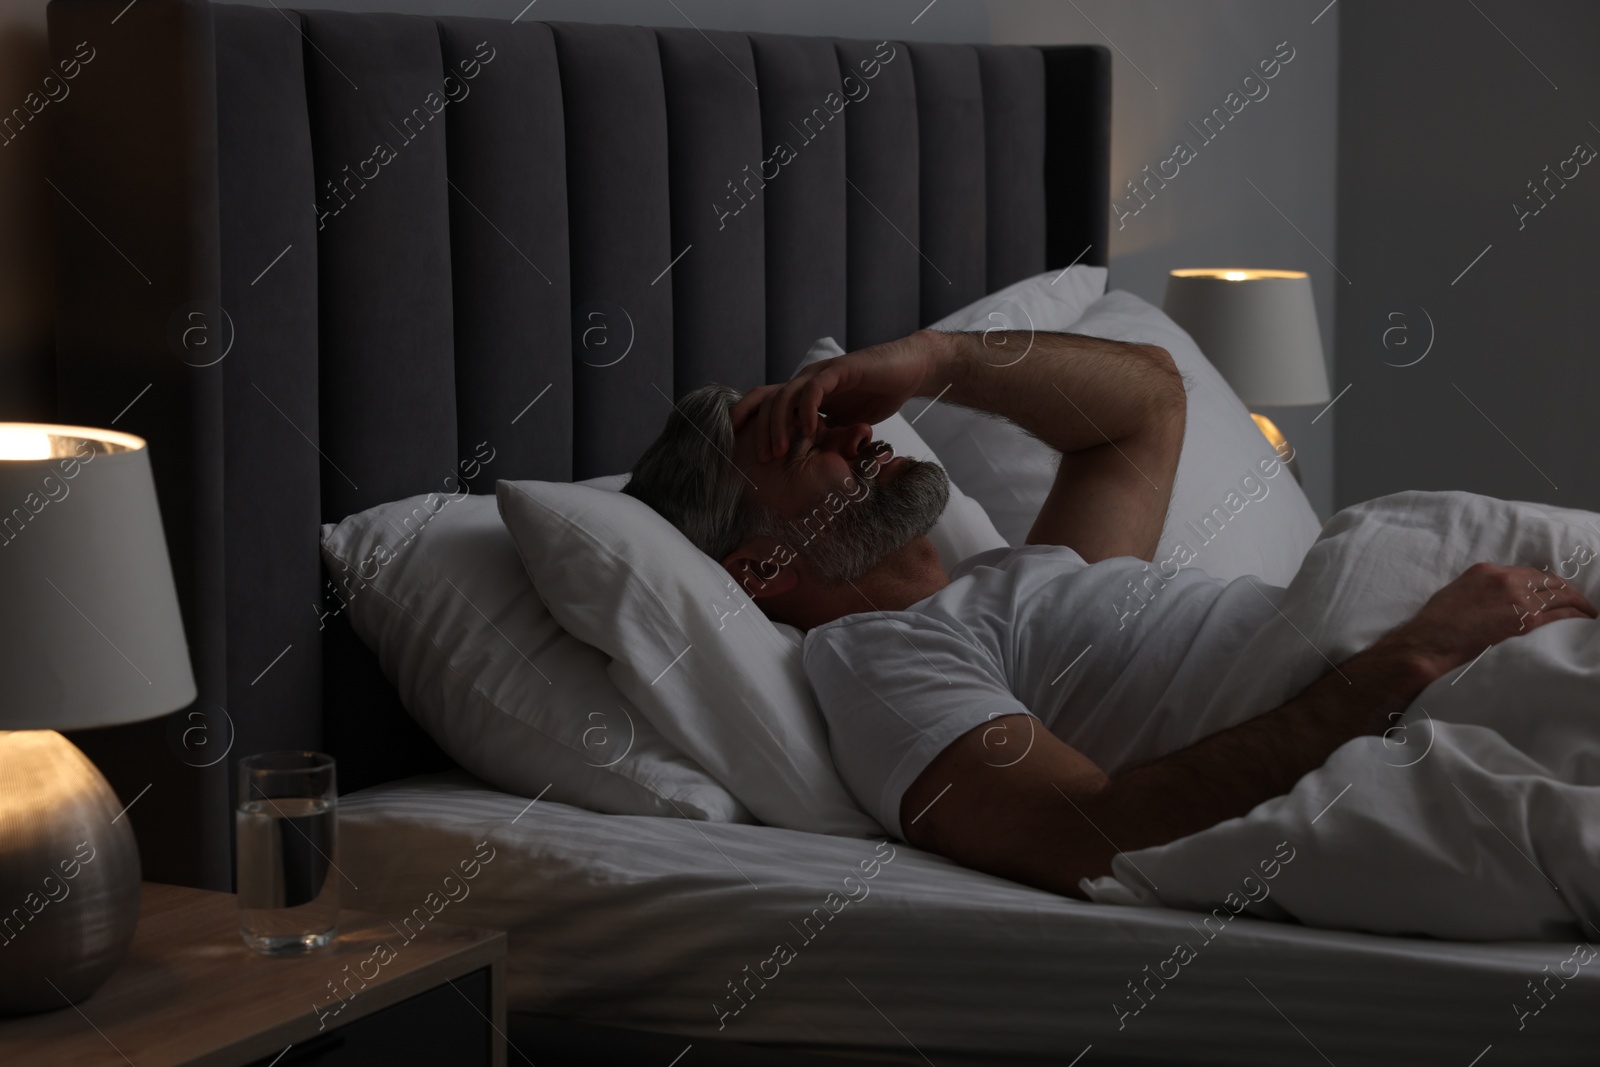 Photo of Mature man suffering from headache in bed at night